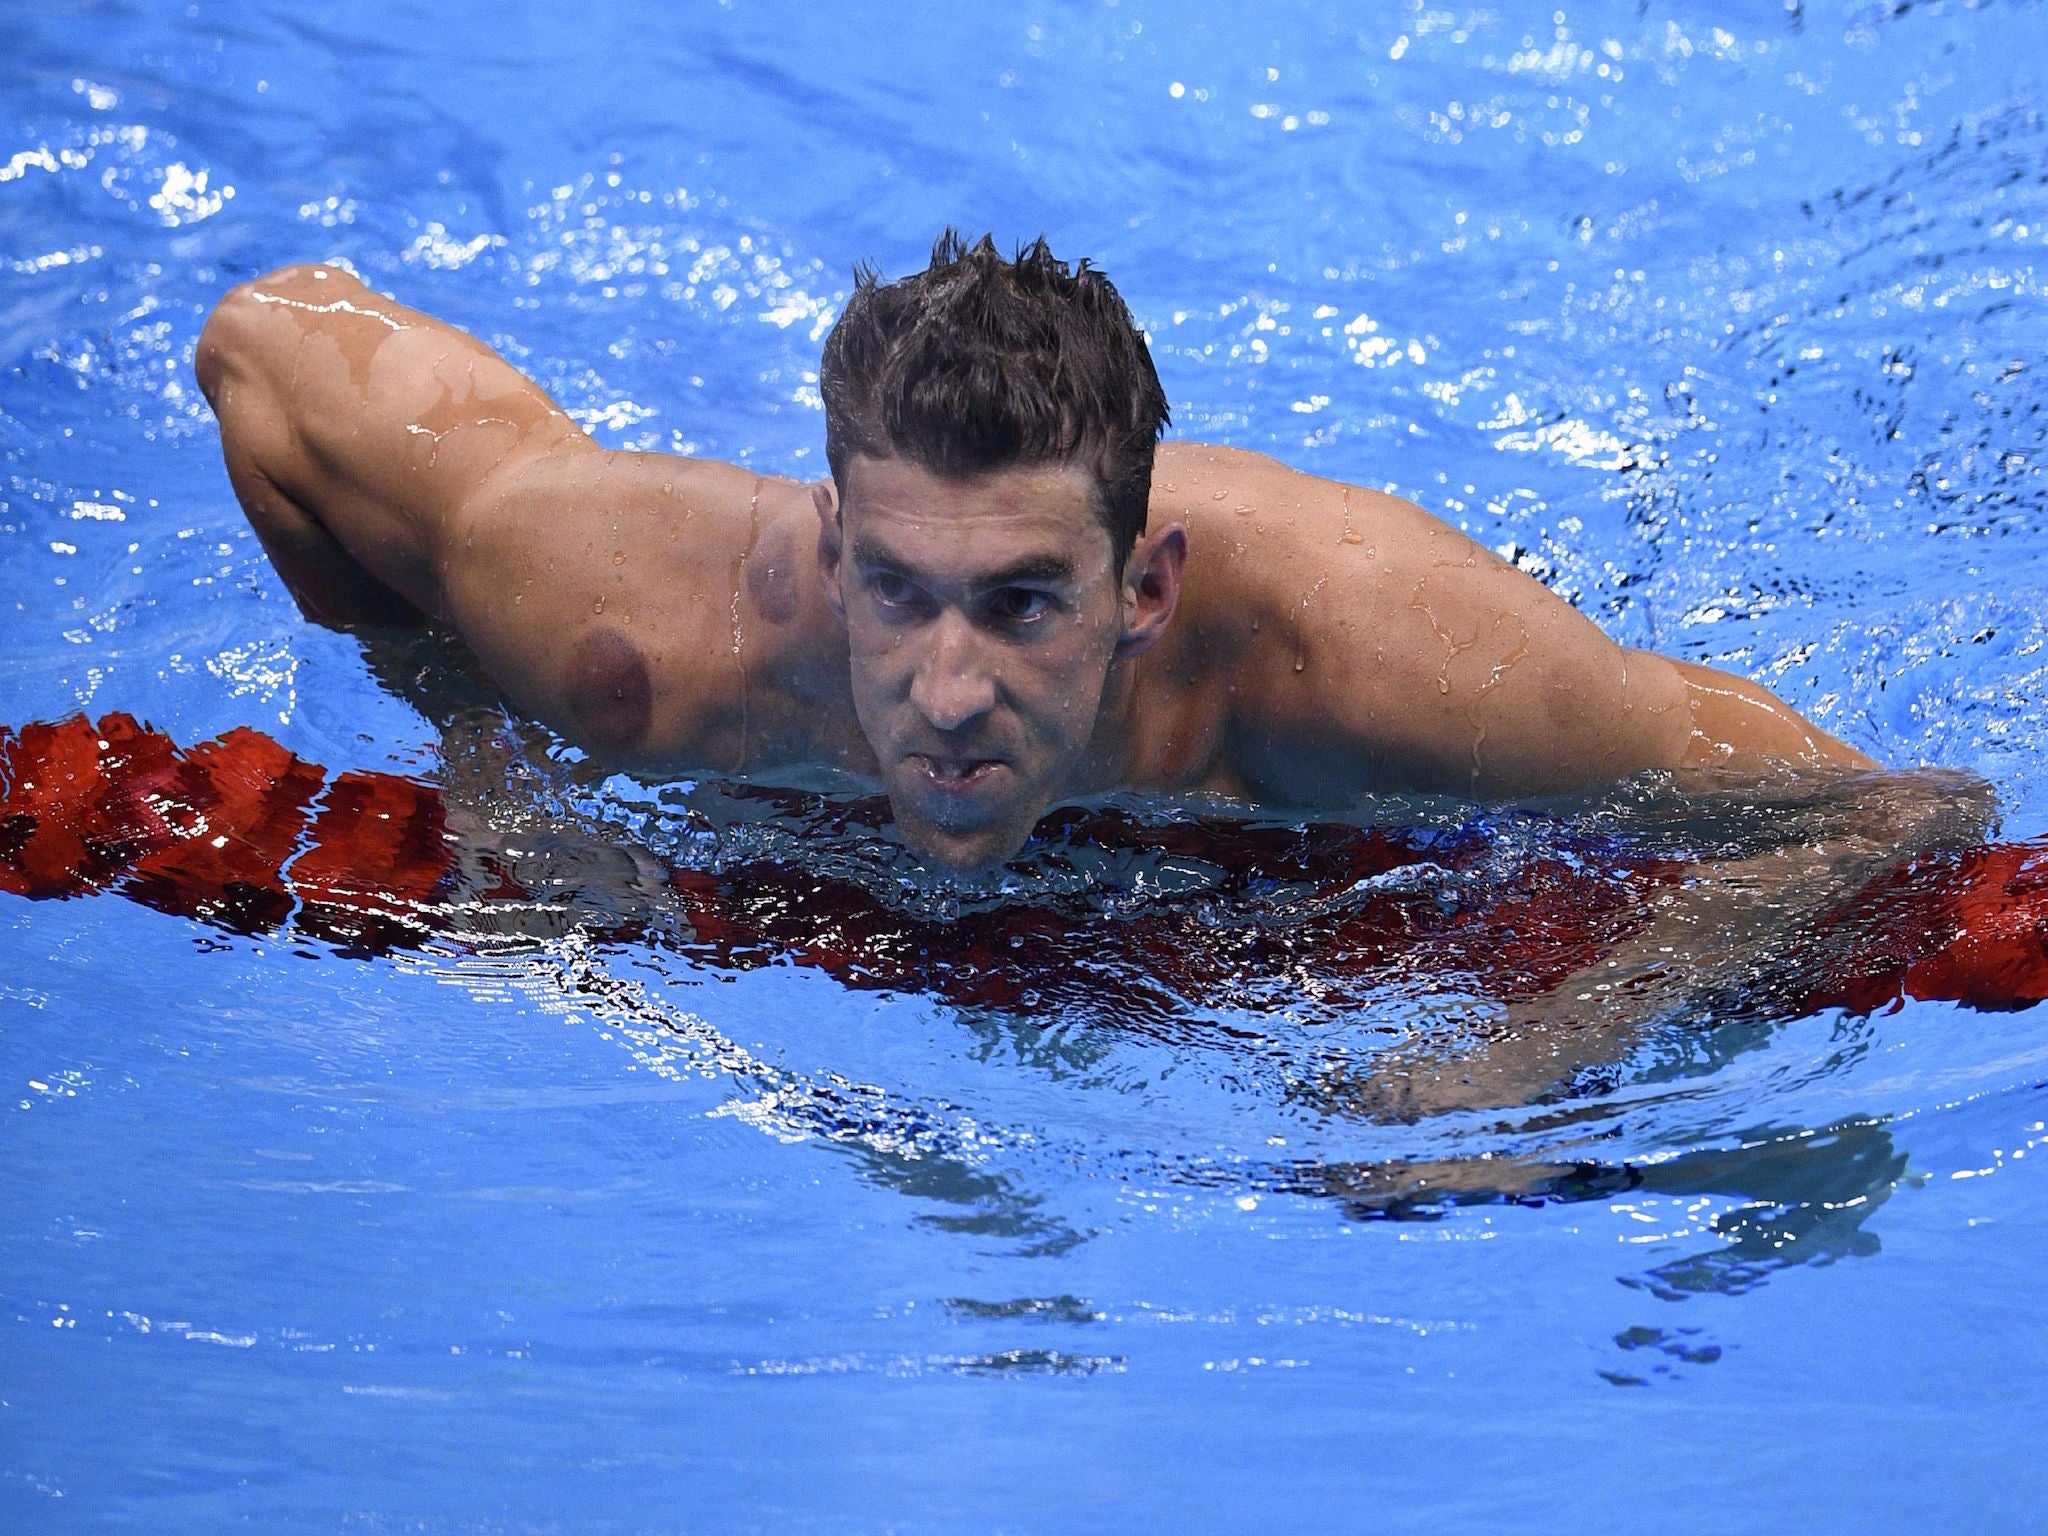 Michael Phelps' facial expressions made headlines this week